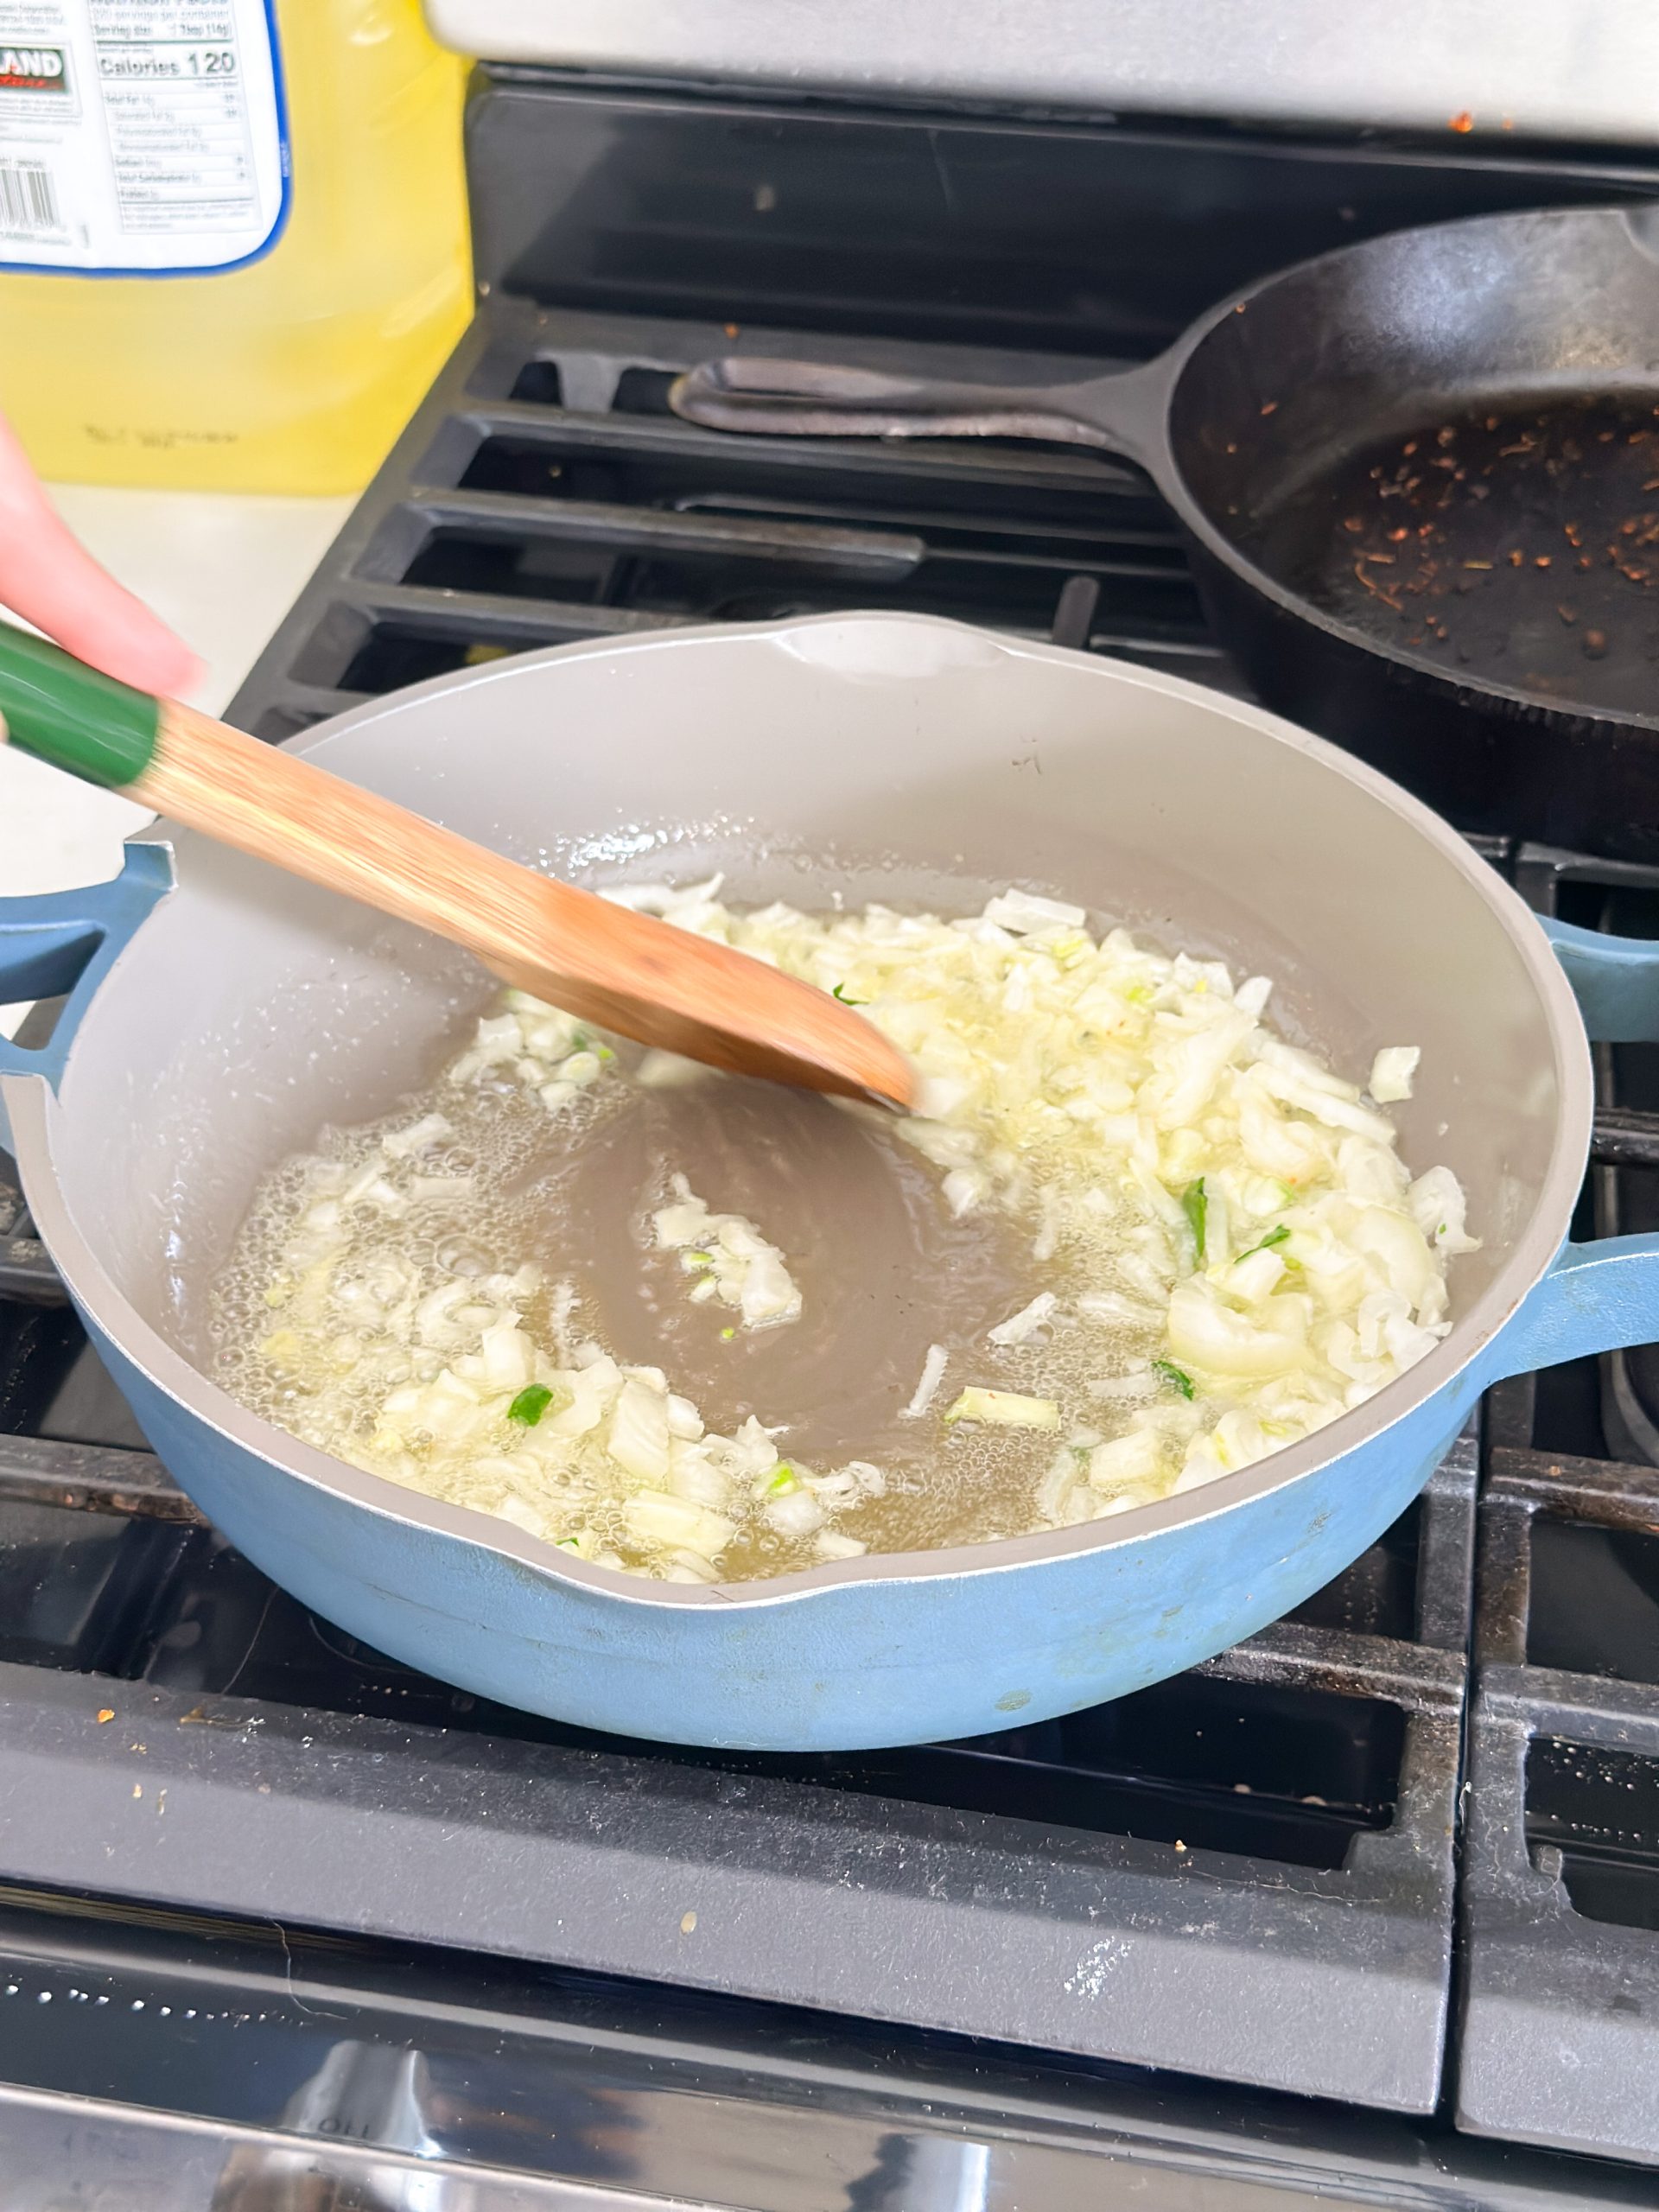 onion being sauted in butter in a blue nonstick pan